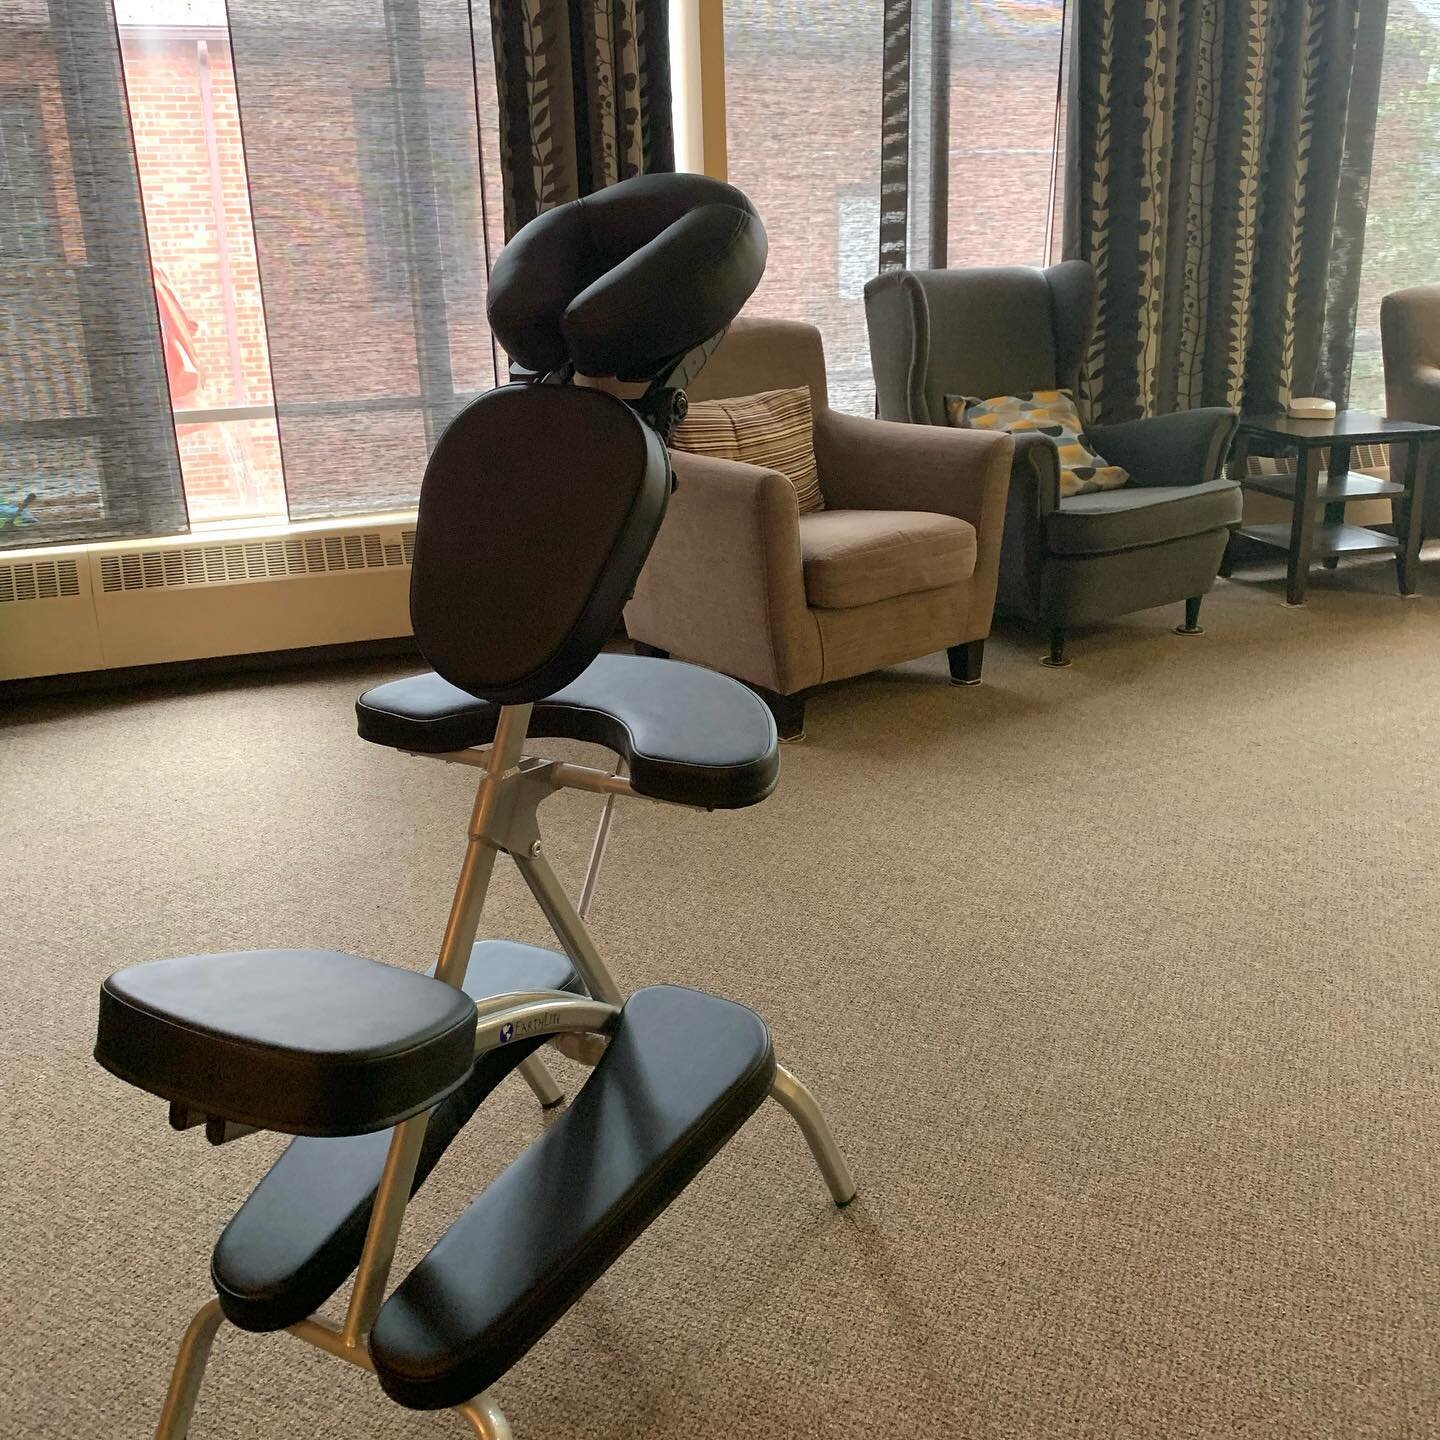 Today I get to offer chair massage at a local preschool for Teacher Appreciation Week! I&rsquo;m so grateful to be able to support so many amazing people through my massage practice&hellip; It&rsquo;s an honor and a privilege to be doing this work, a